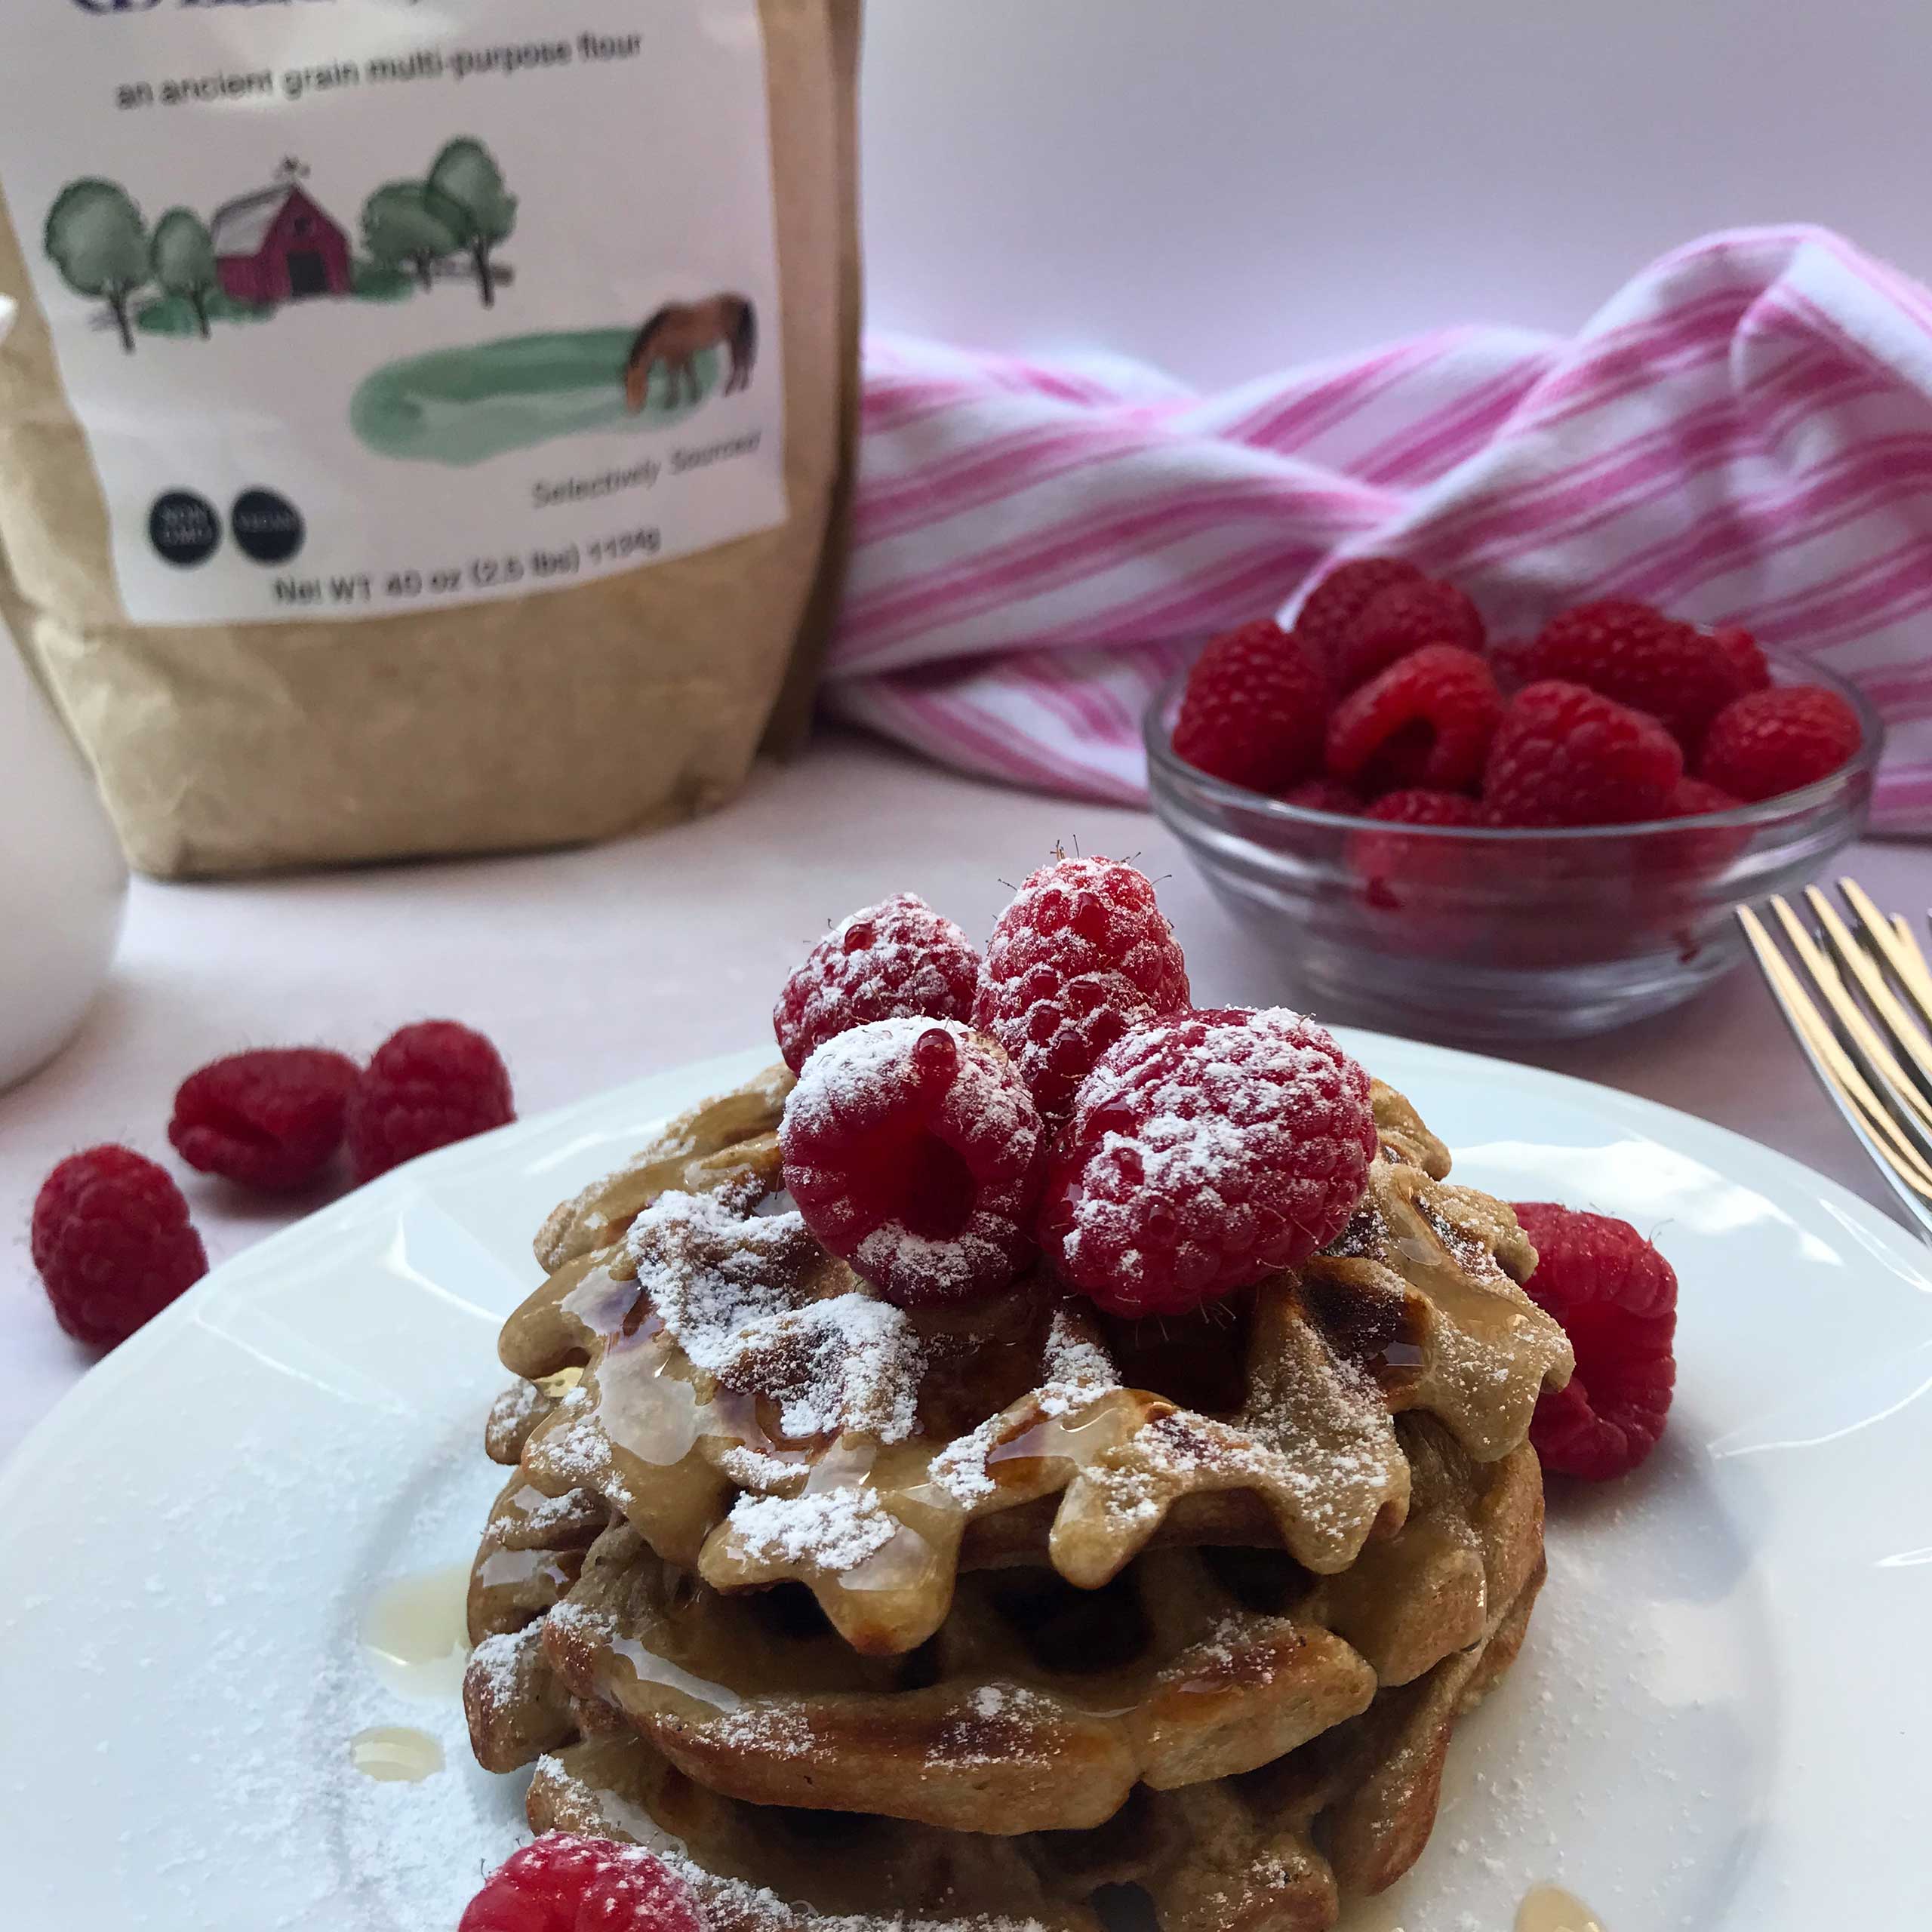 Peanut Butter Waffles | My Curated Tastes